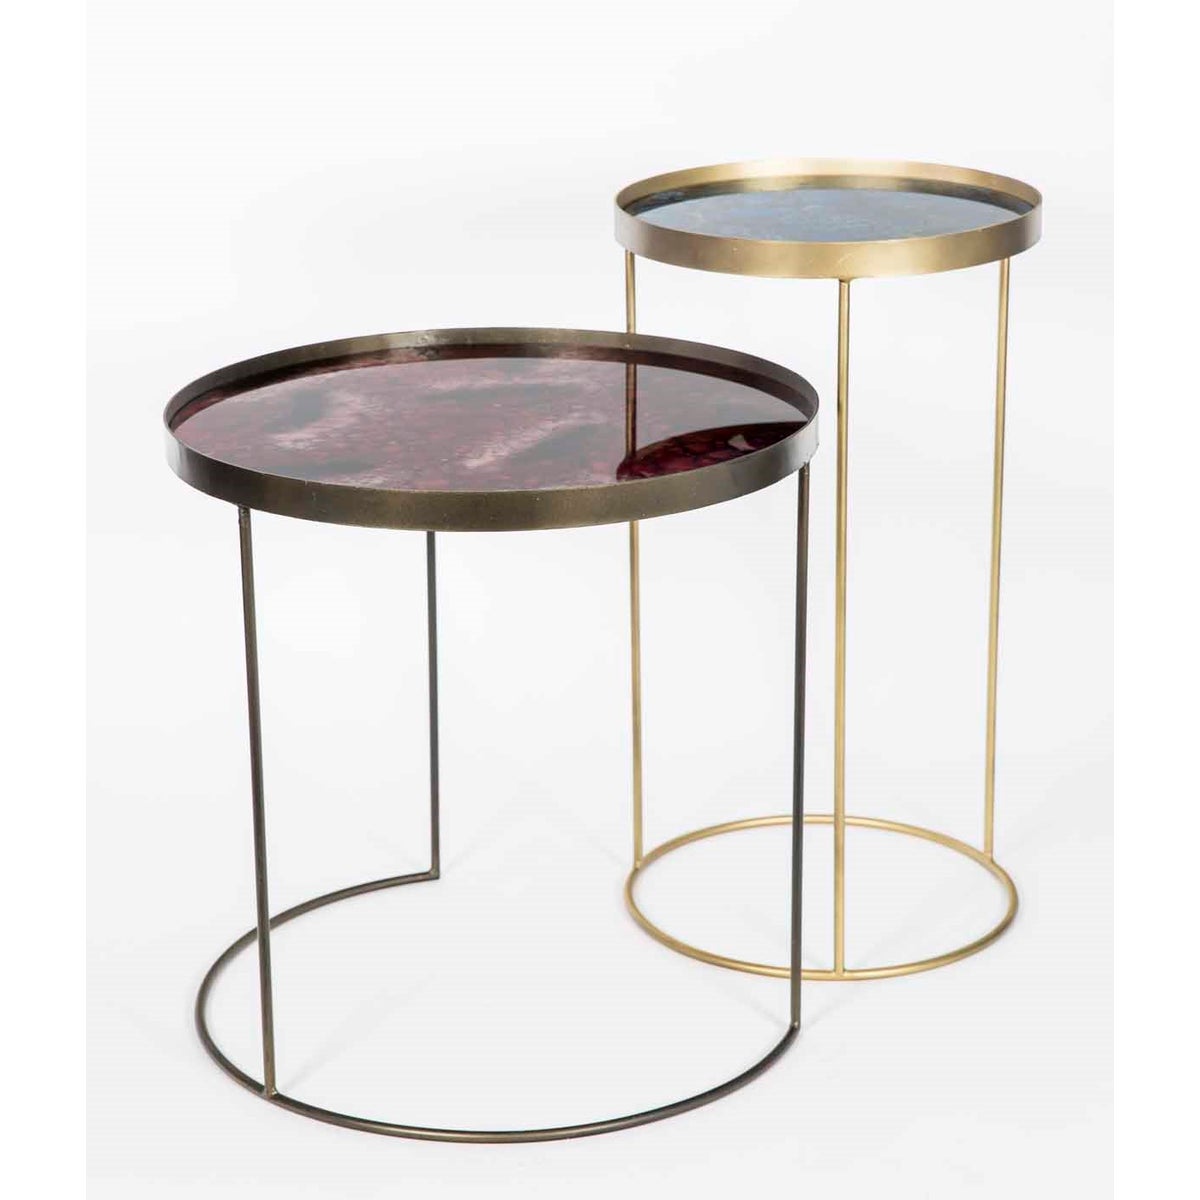 Lily Accent Table in Antique Brass with Glass Top in Seastone Finish